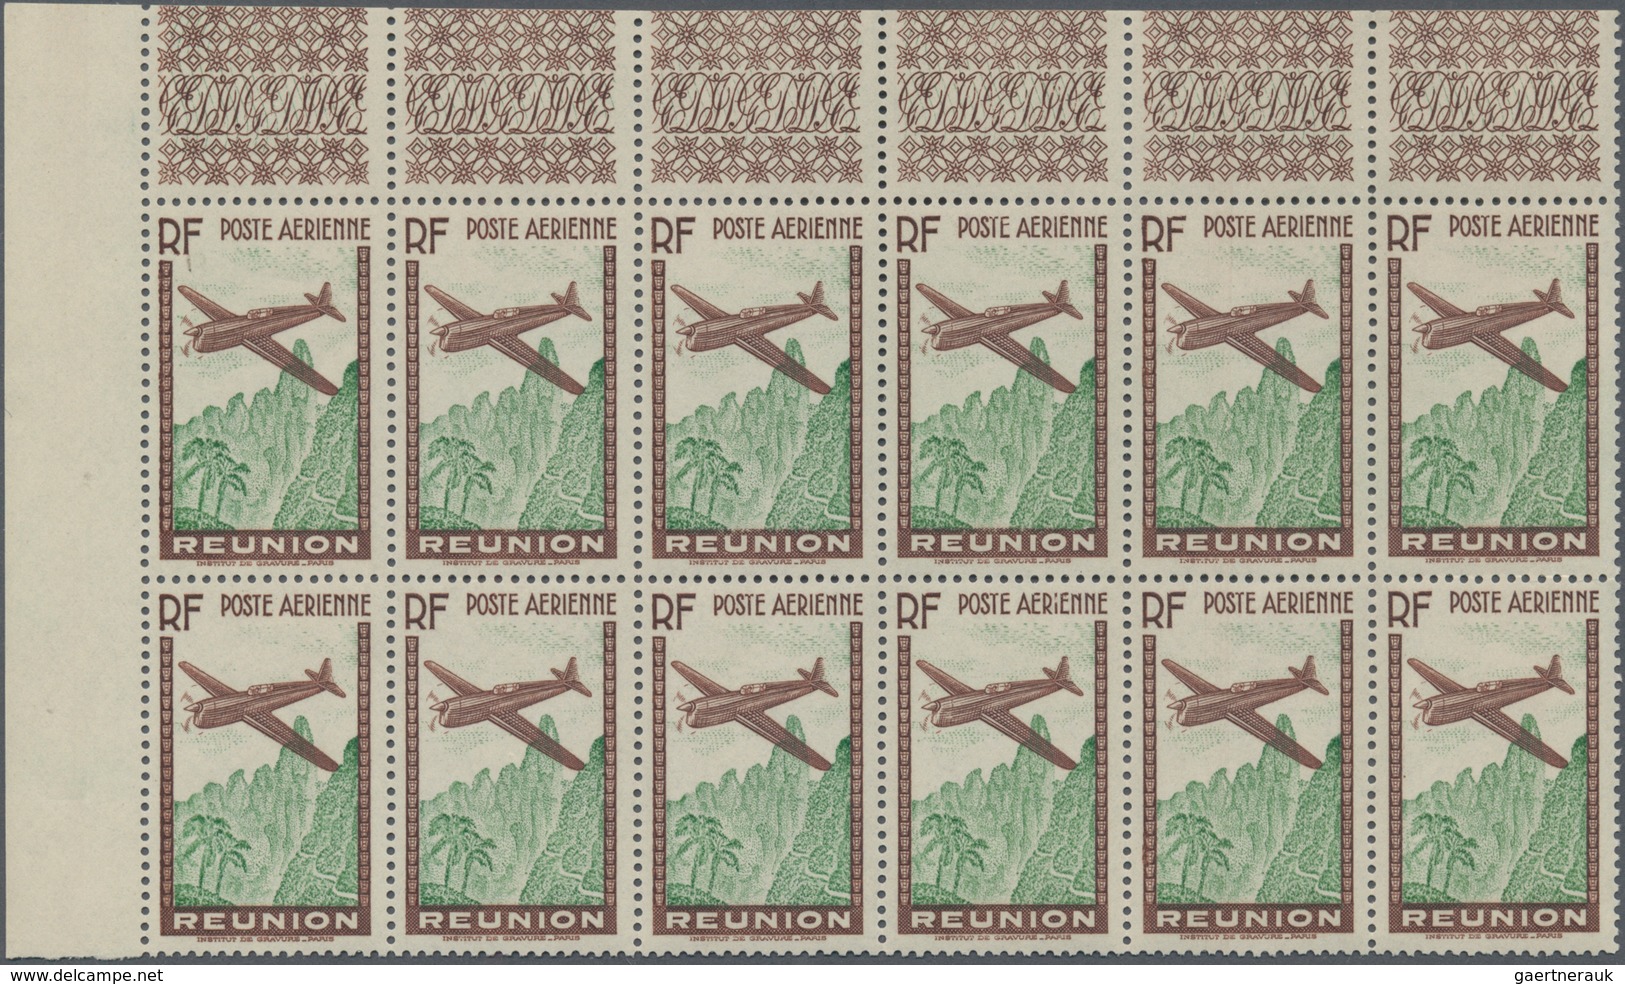 Reunion: 1938, Airmails, 12.65fr. Brown/yellow-green Showing Variety "Missing Value", Marginal Block - Unused Stamps